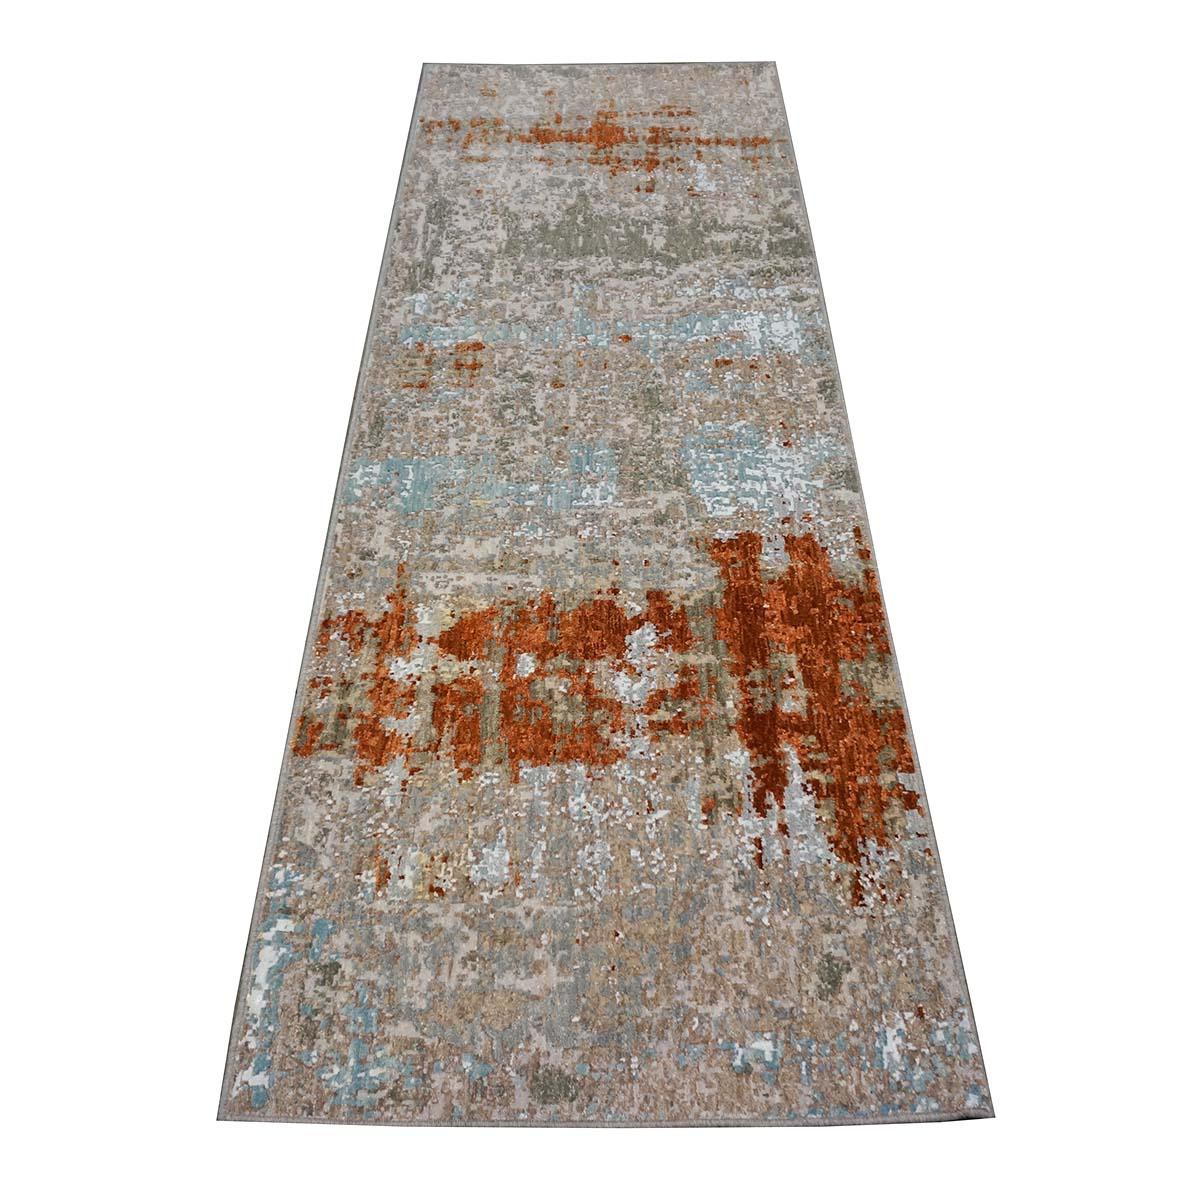  Ashly Fine Rugs presents a New Modern Inspired wool & silk 3x9 Grey, Rust, & Blue Handmade Runner Rug with lustrous shiny fibers and a thick durable pile. This gorgeous collection has been designed by our in-house designer and was 100% handmade by